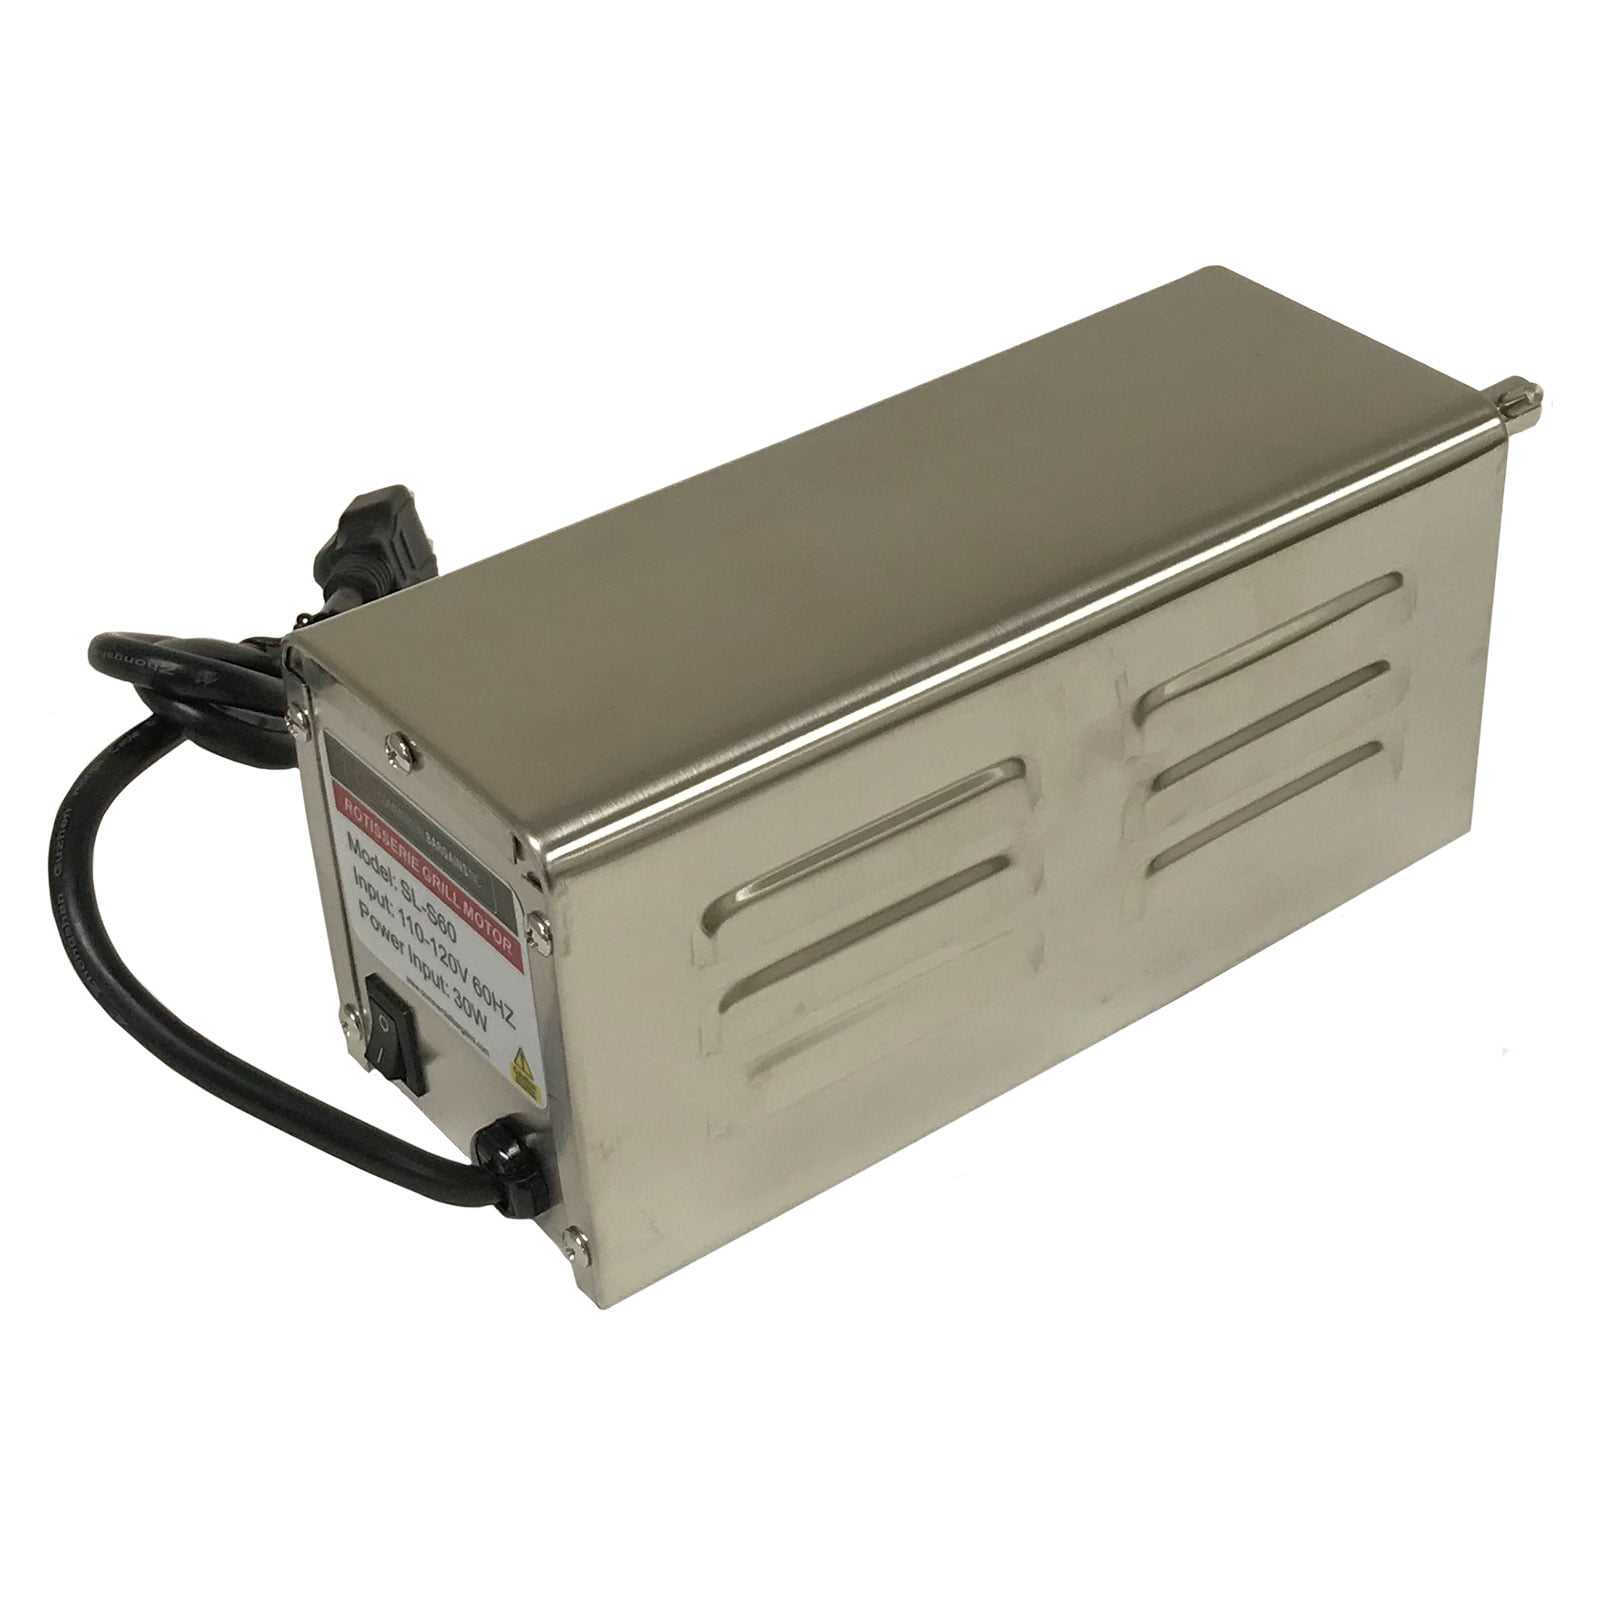 and More Commercial Bargains Electric Heavy-Duty Stainless Steel Spit Automatic Rotisserie Motor for Pig Lamb Turkey Chicken 13 Watt - Up to 80lbs 